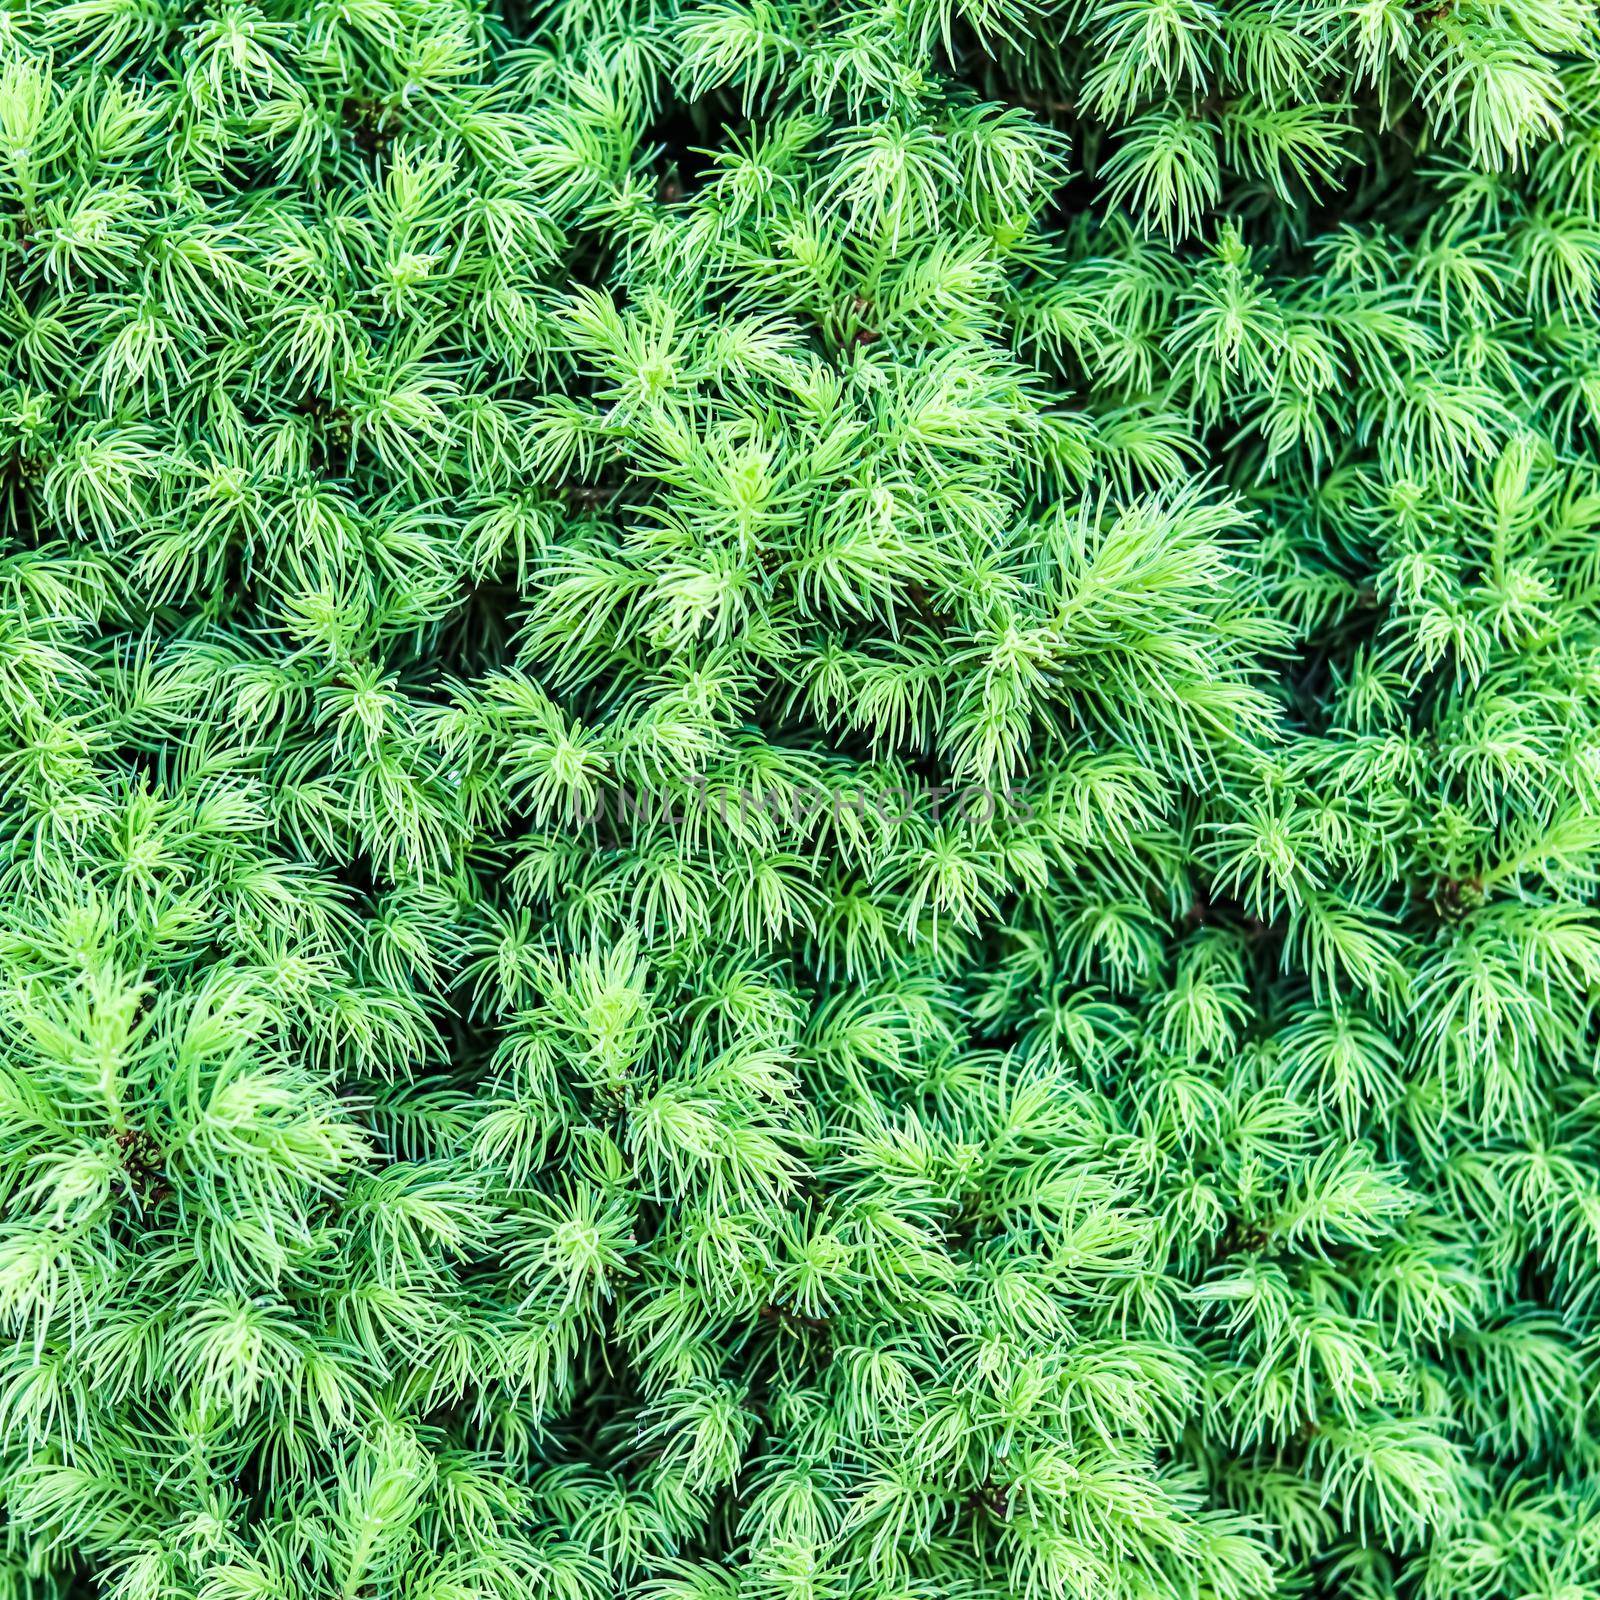 Background from shoots Canadian spruce Picea glauca Conica in spring. White spruce. Decorative coniferous evergreen tree